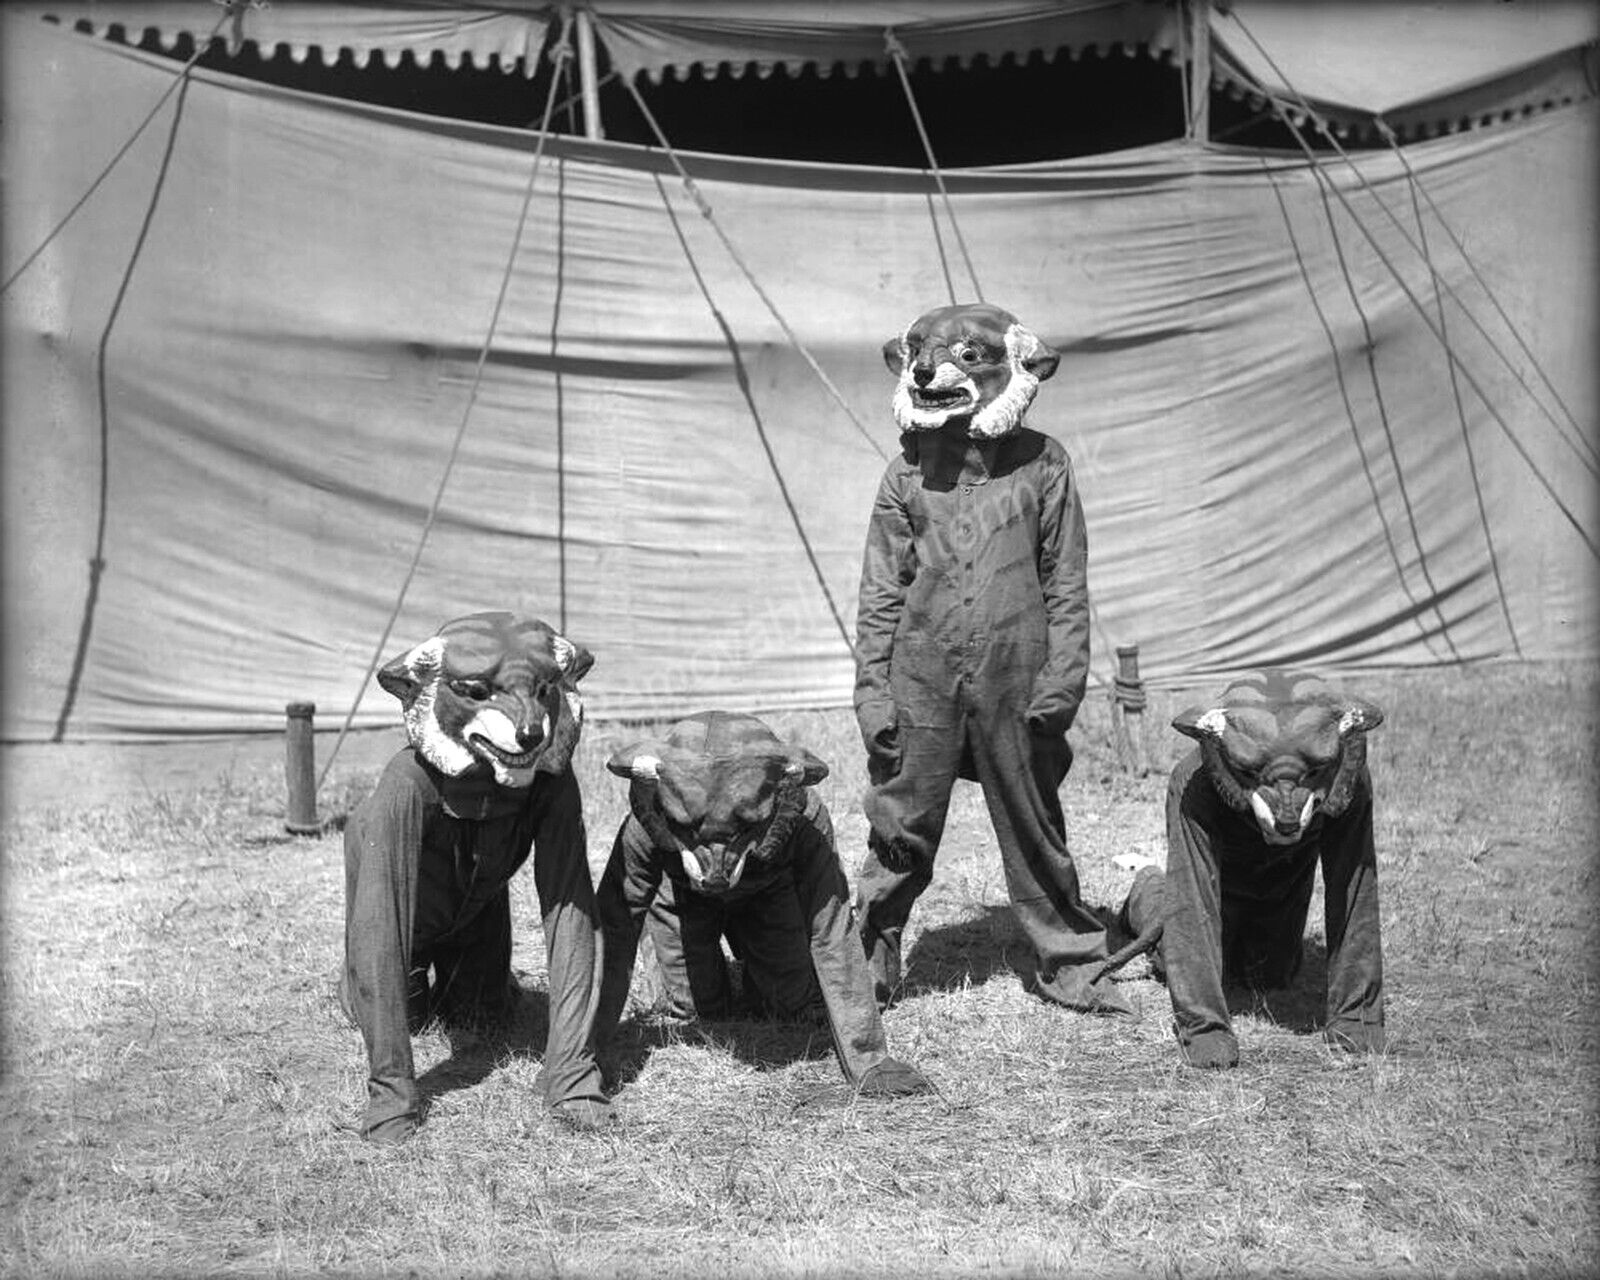 Odd Circus Performers in Tiger Costumes -Vintage Photo Print 5x7